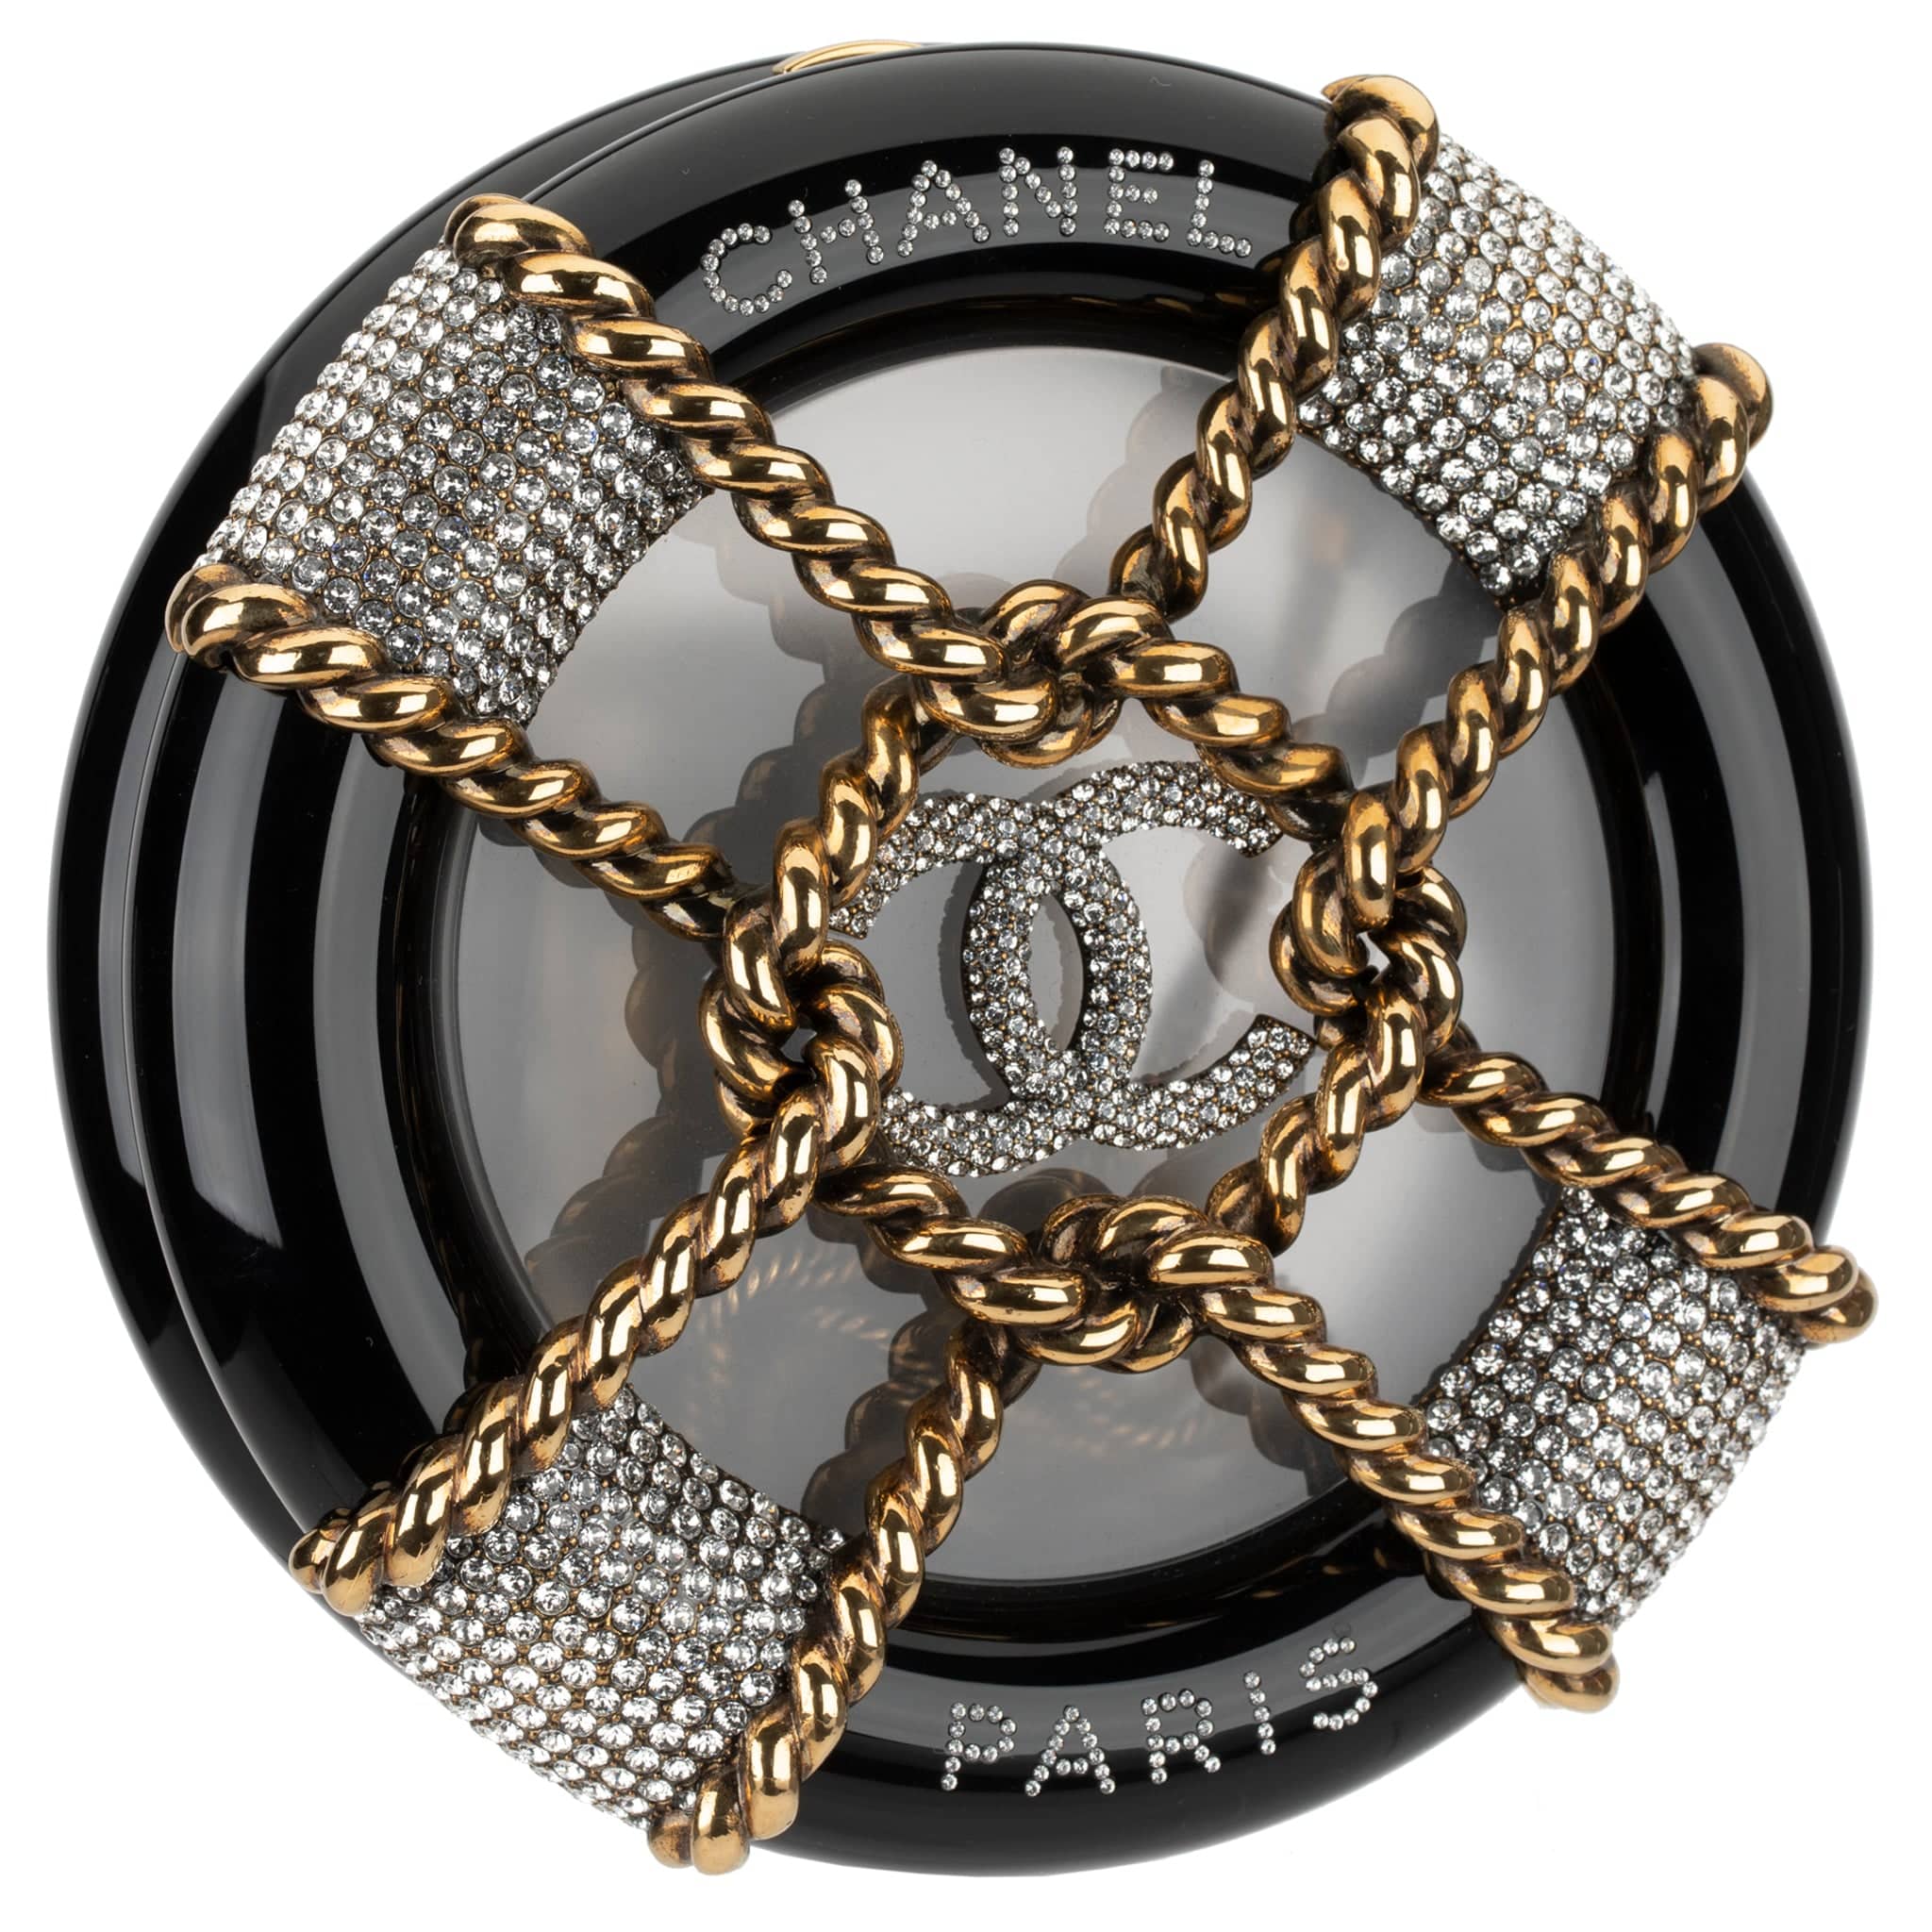 CHANEL MINAUDIÈRE LIMITED EDITION BLACK, GOLD & CLEAR RESCUE WHEEL GOLD-TONE HARDWARE - On Repeat